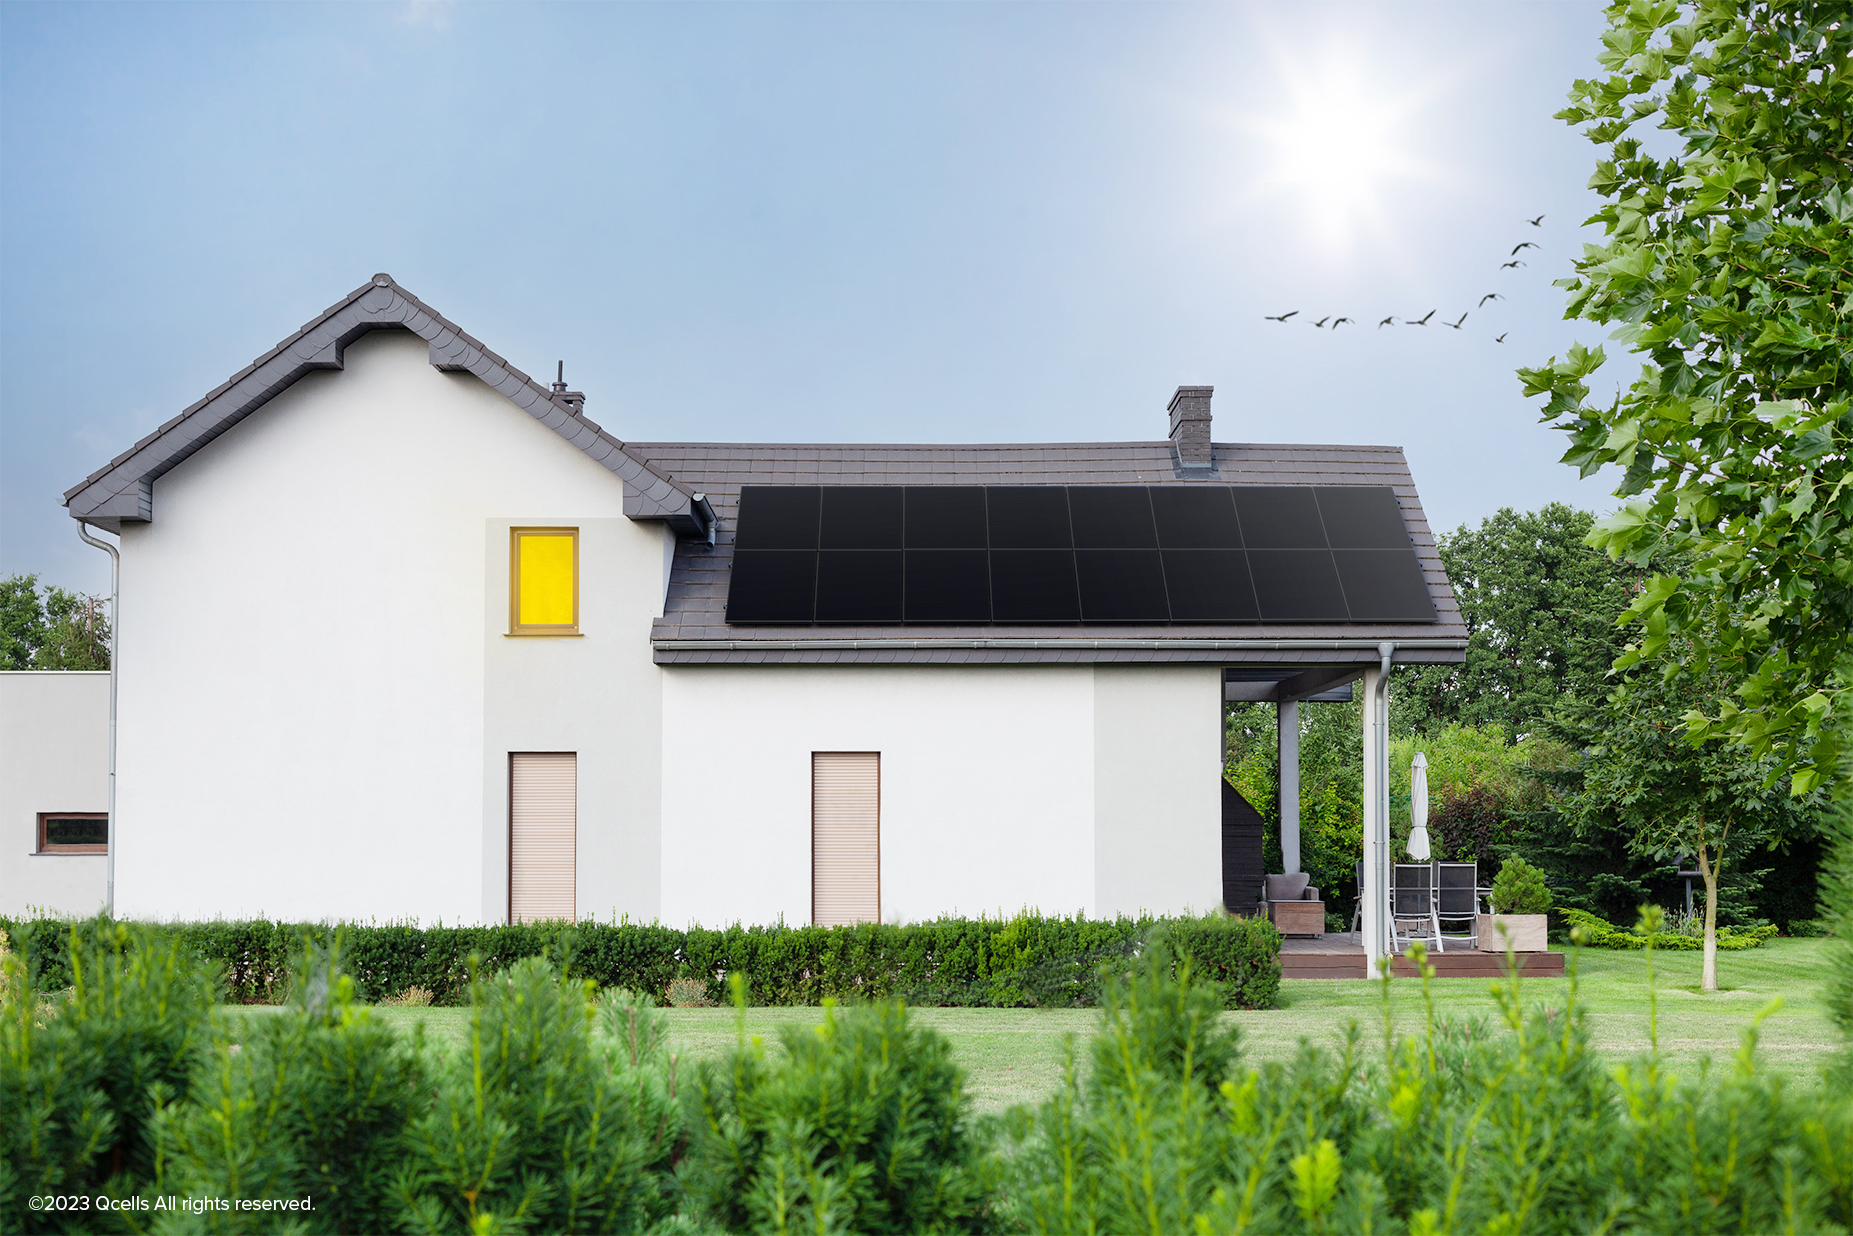 Image of a residential home with installed solar panel system